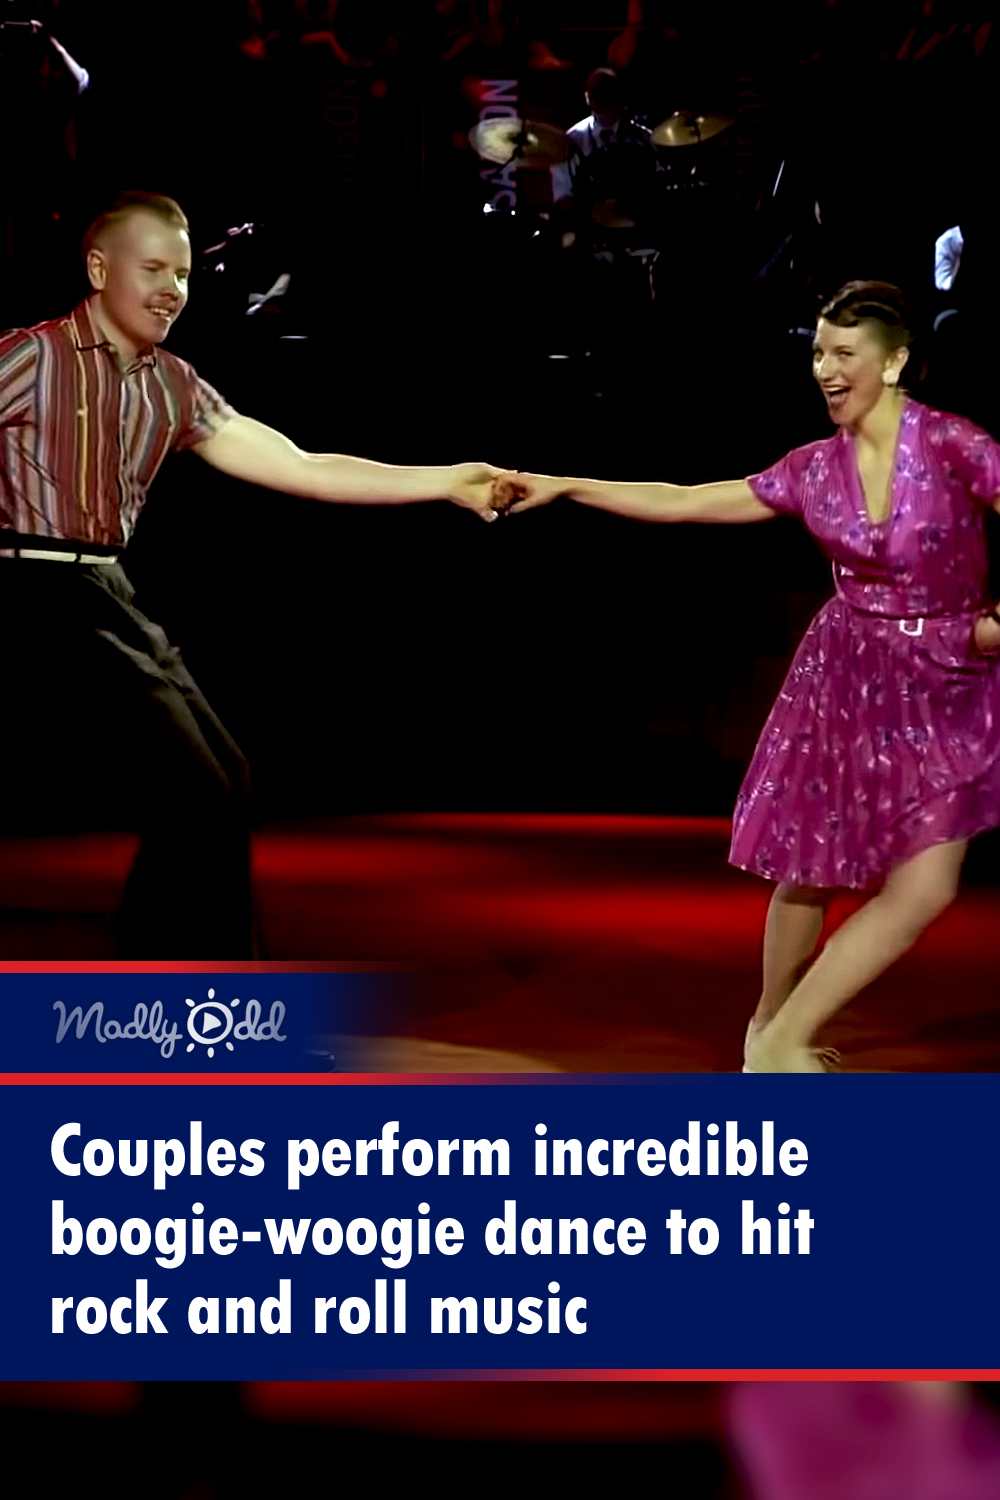 Couples perform incredible boogie-woogie dance to hit rock and roll music